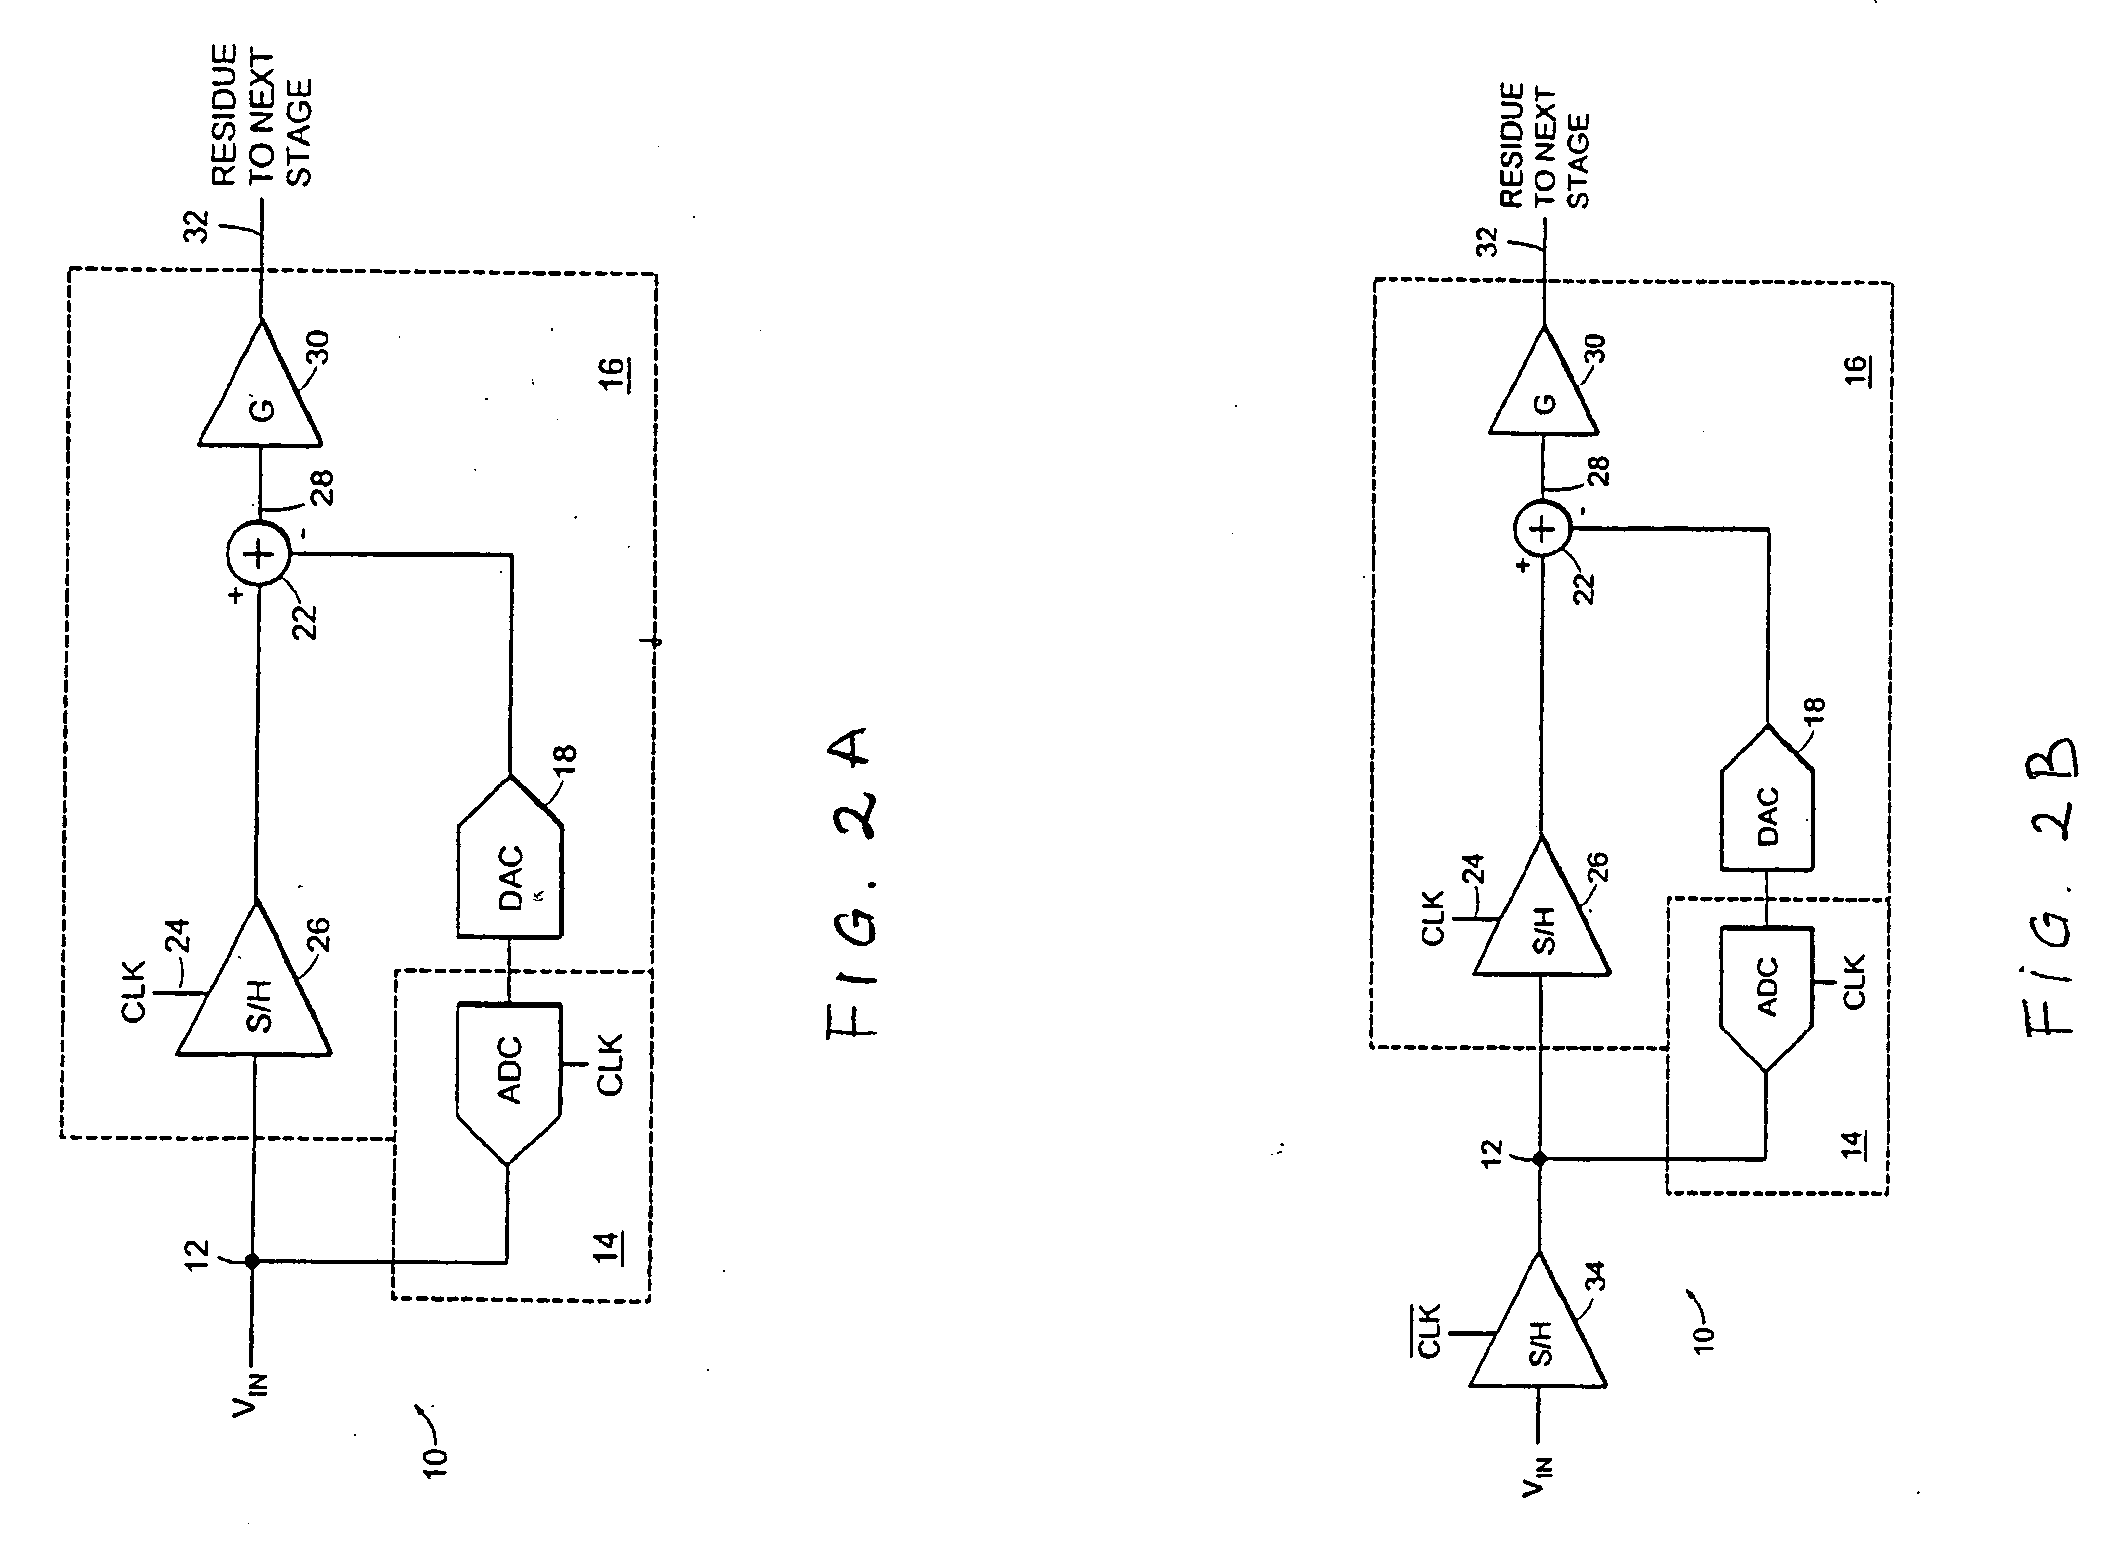 Analog-to-digital converter without track-and-hold